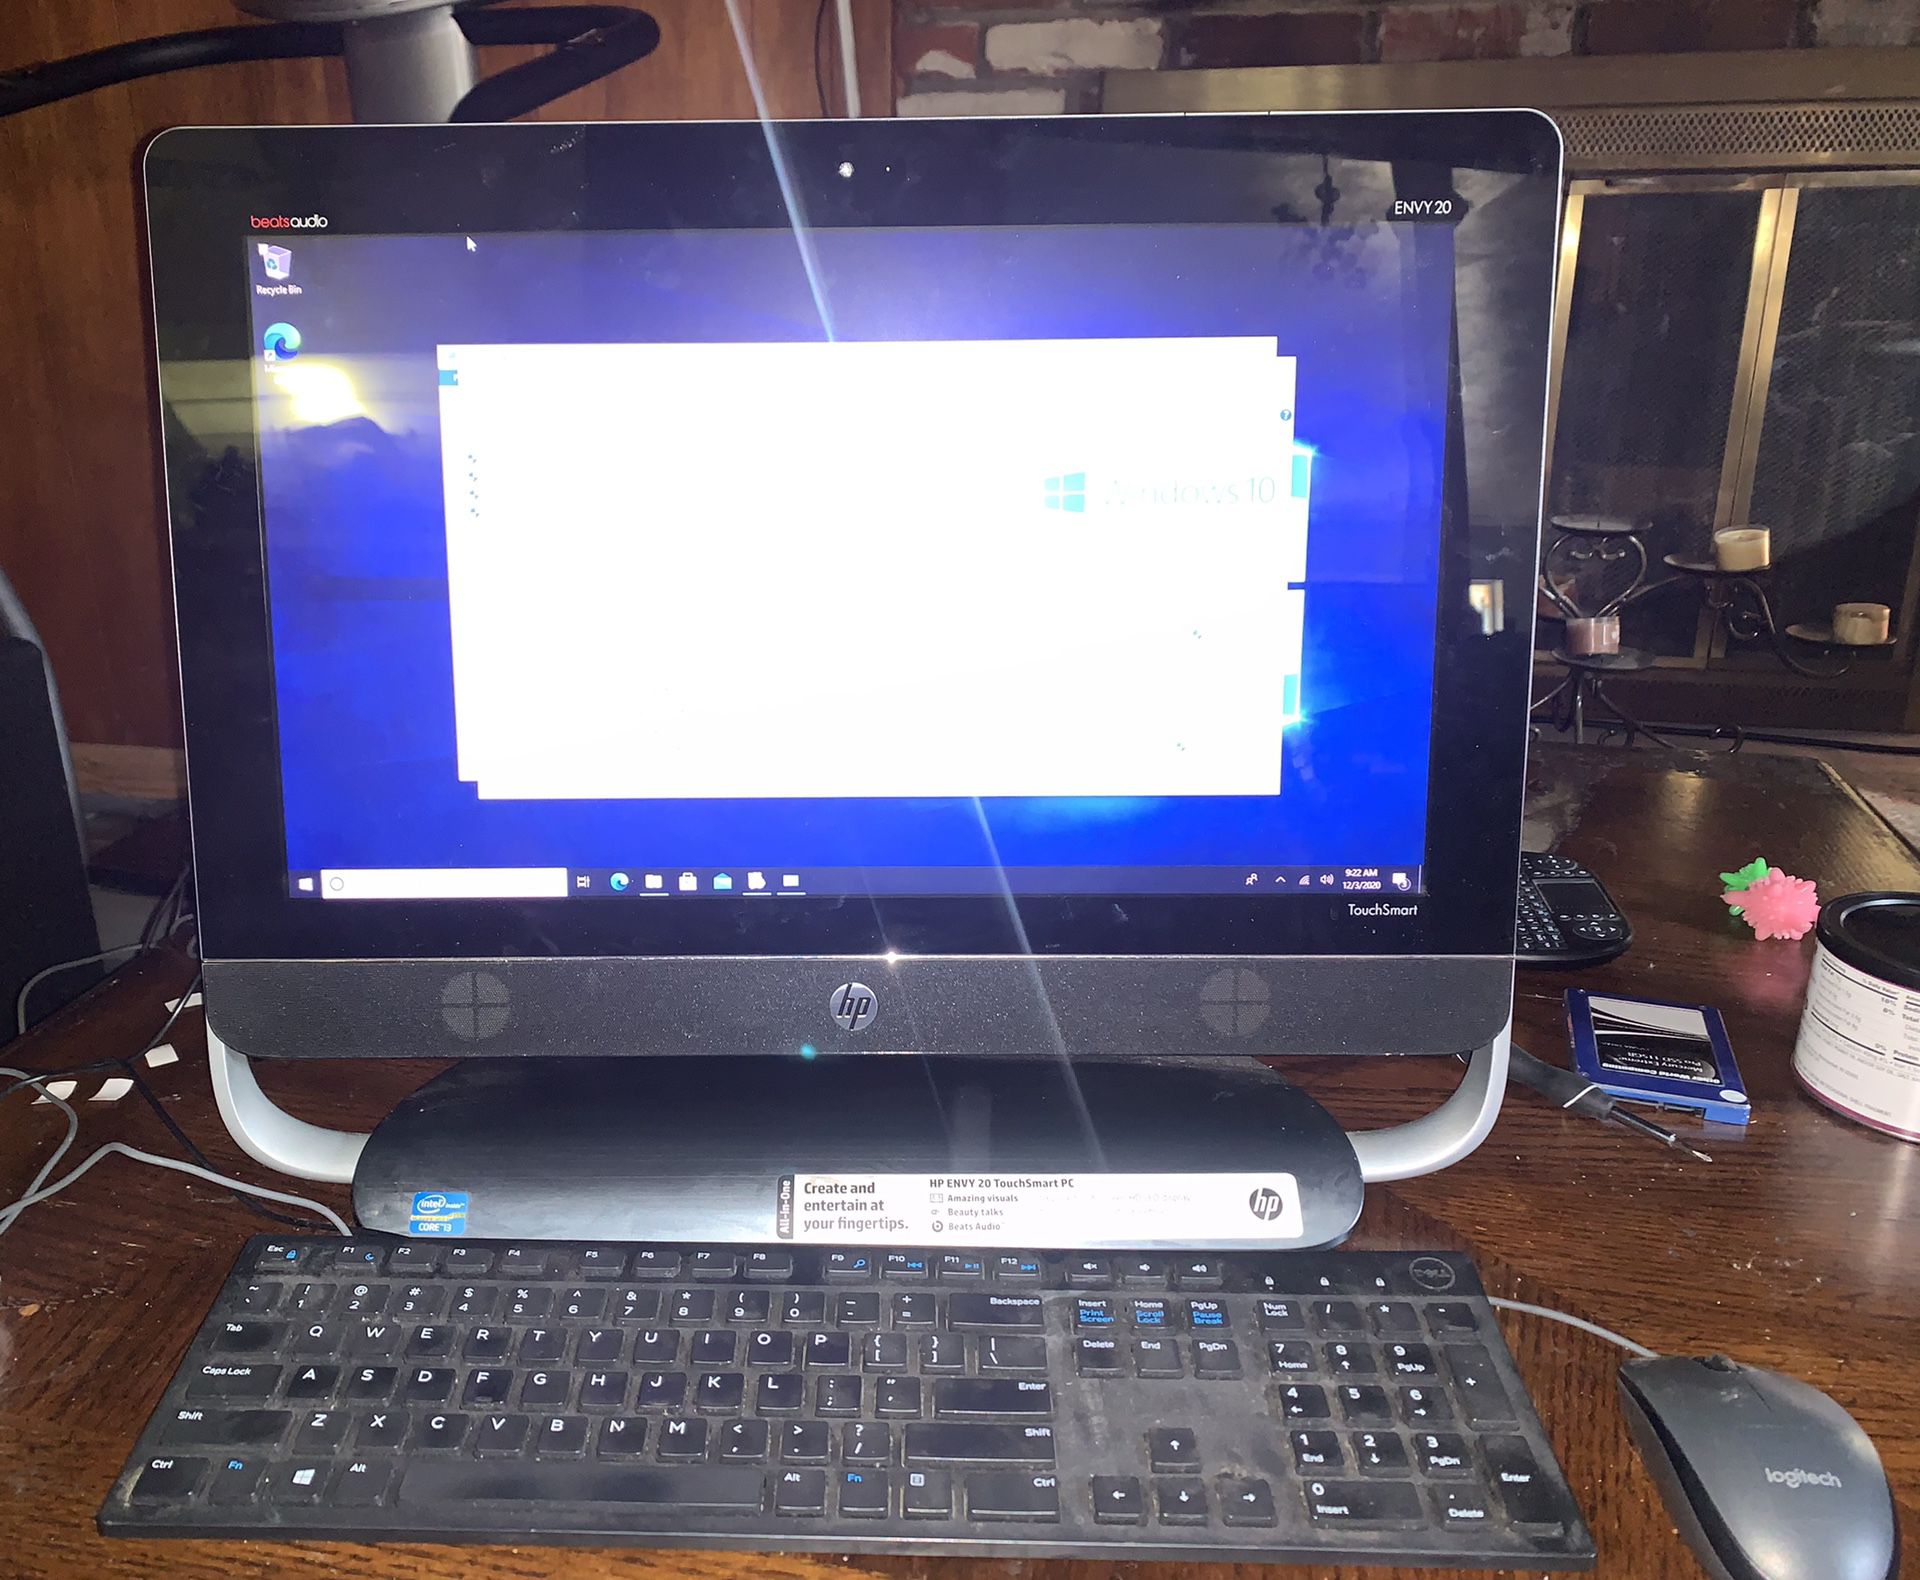 HP TouchSmart beats Envy 20 Intel i3-2130 3.40GHz 4GB RAM 500GB 20" All in One PC